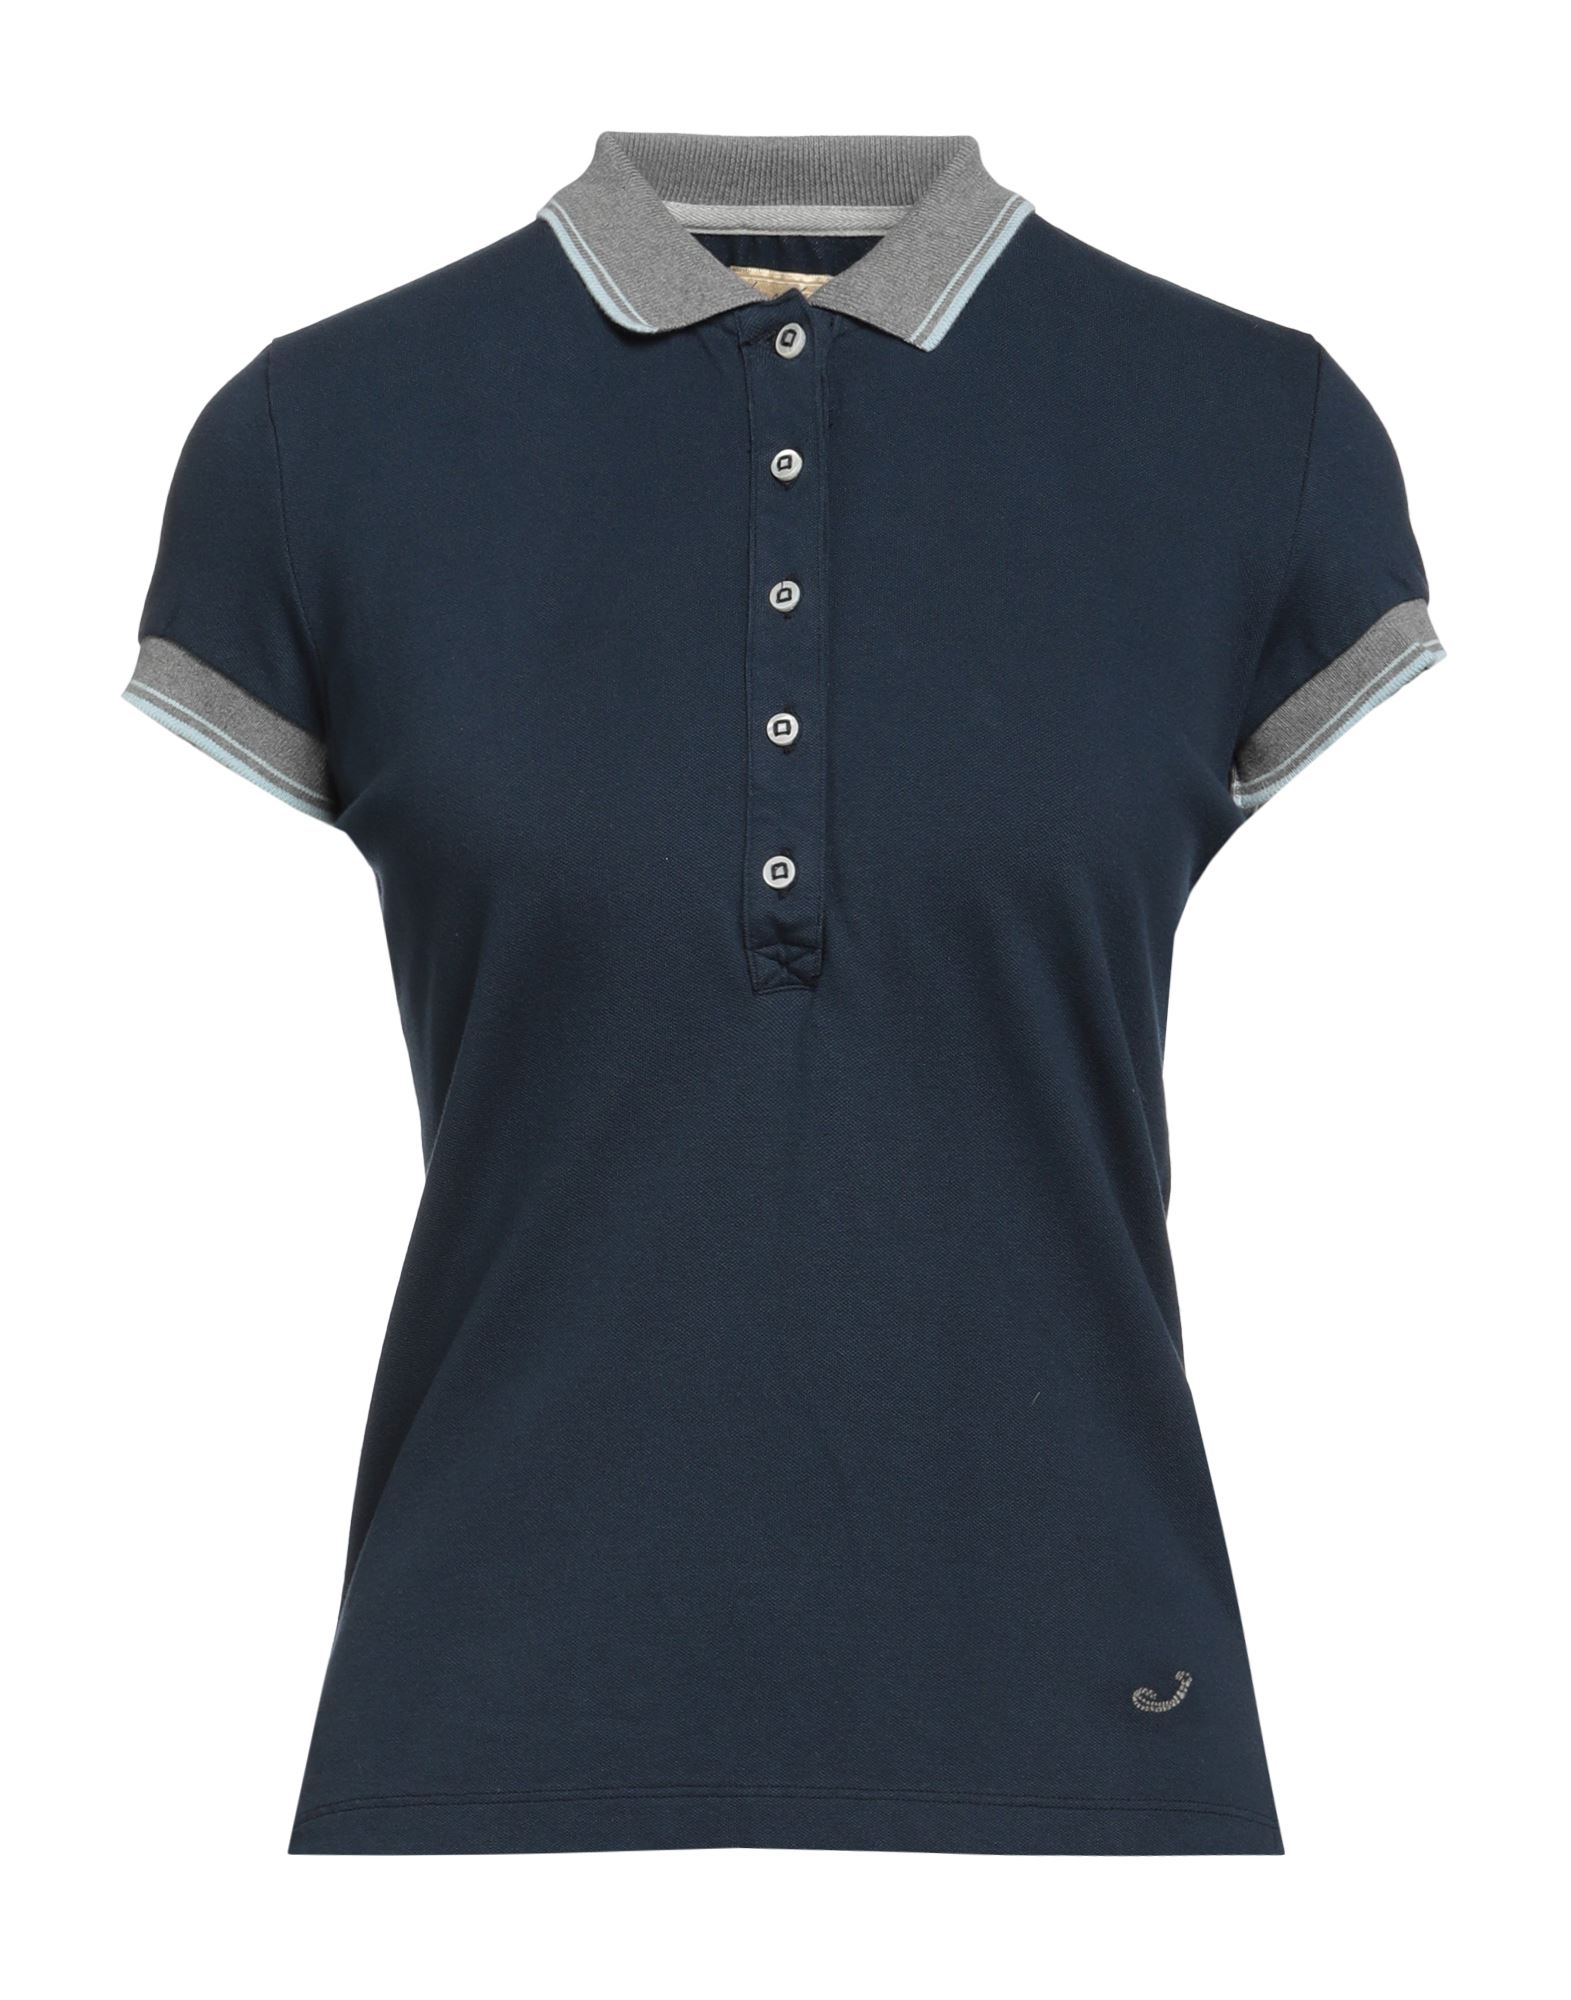 Jacob Cohёn Polo Shirts In Navy Blue